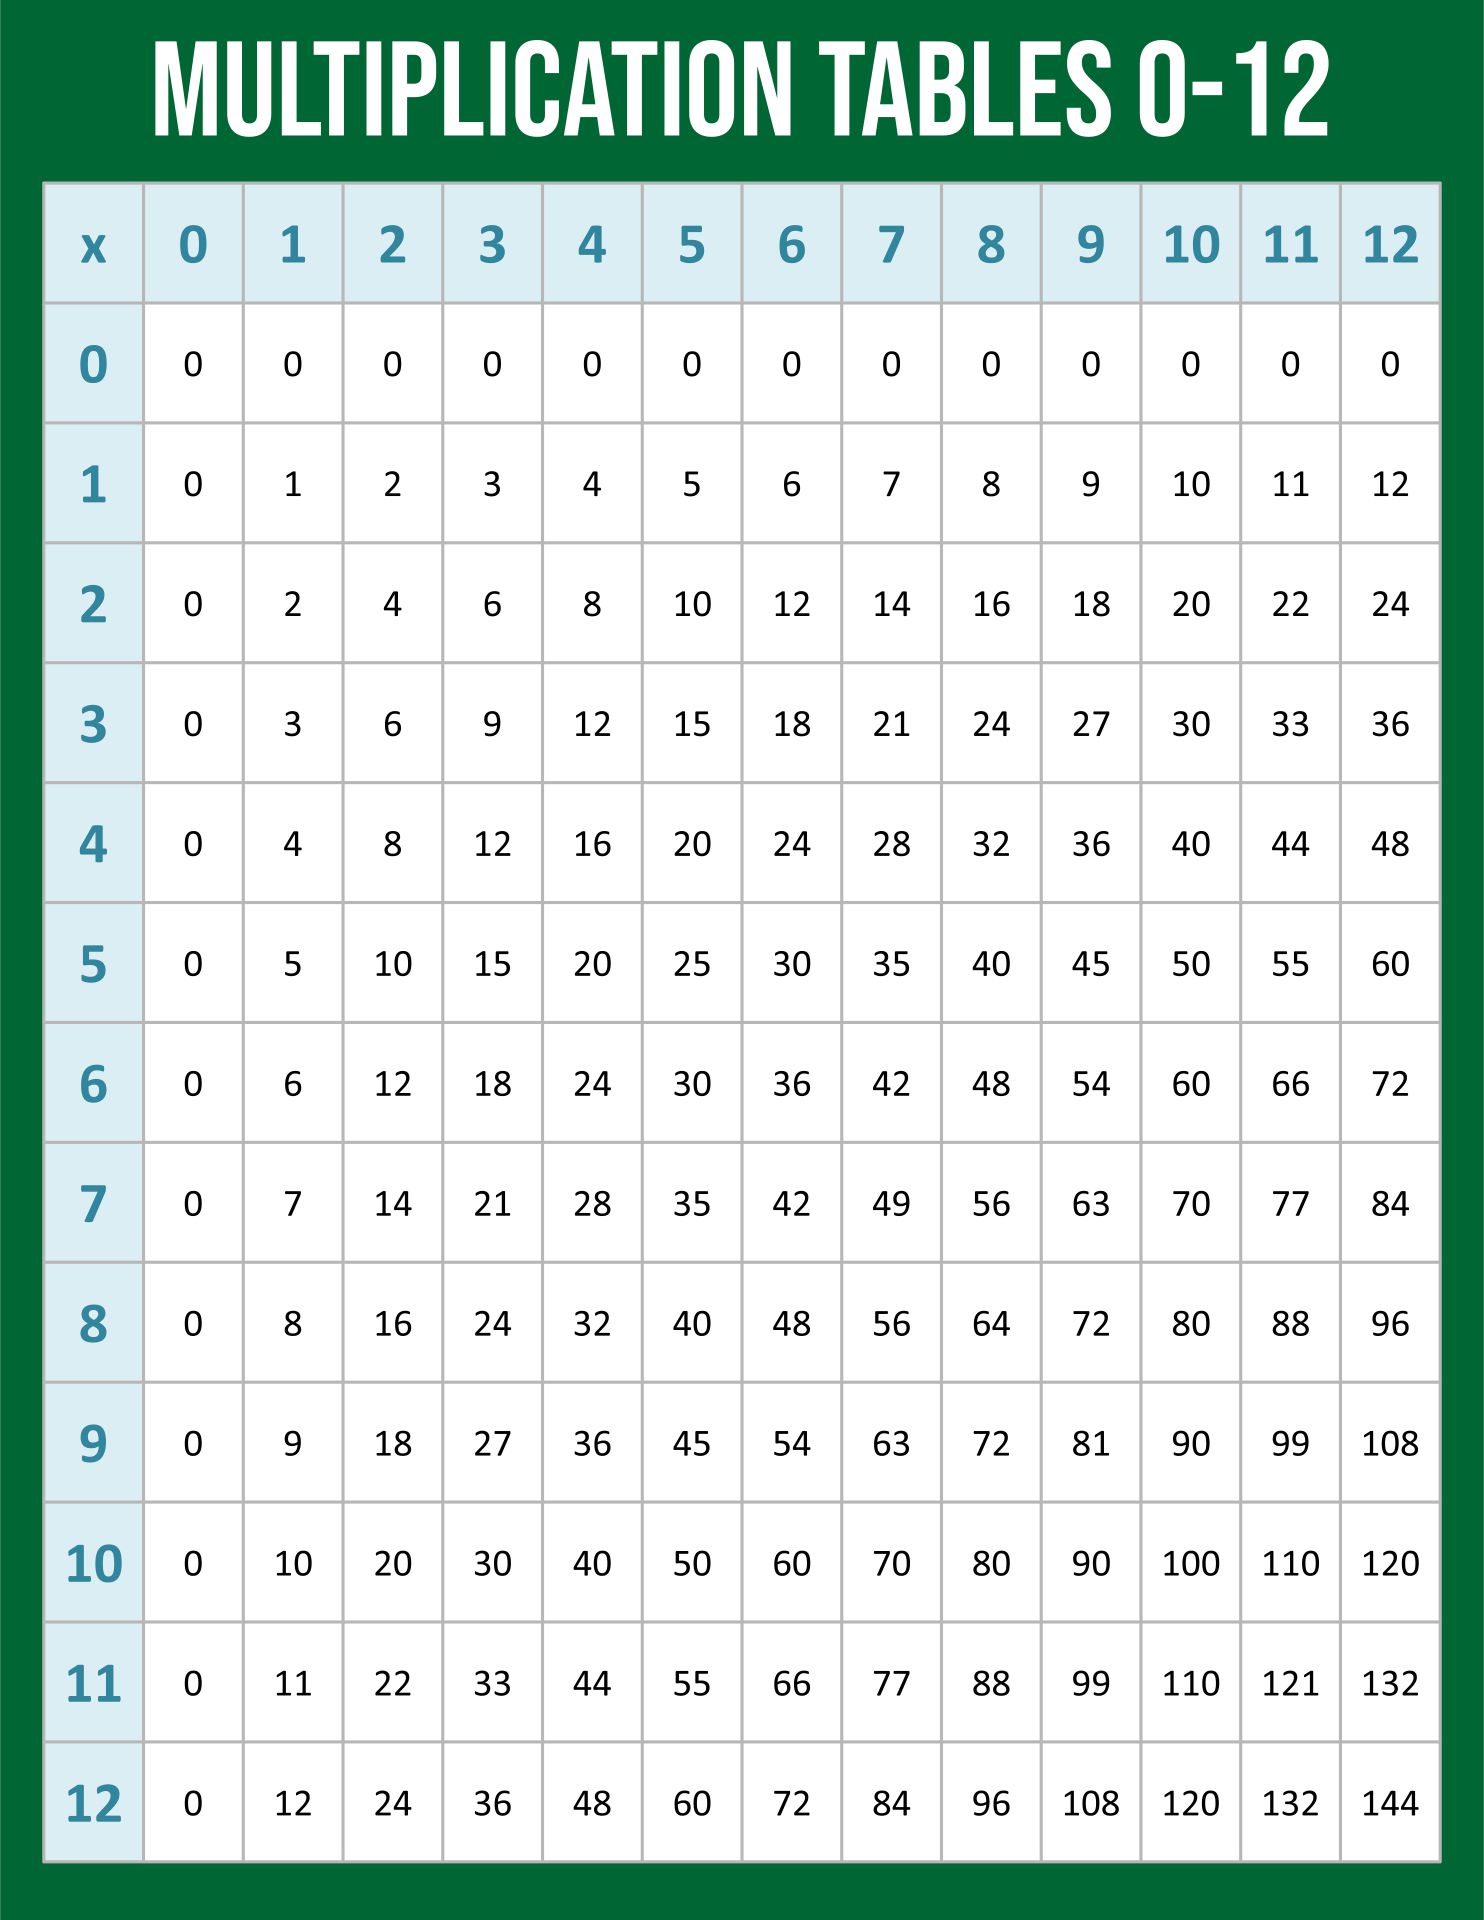 times-tables-1-12-printable-worksheets-have-students-multiply-the-number-in-the-center-by-the